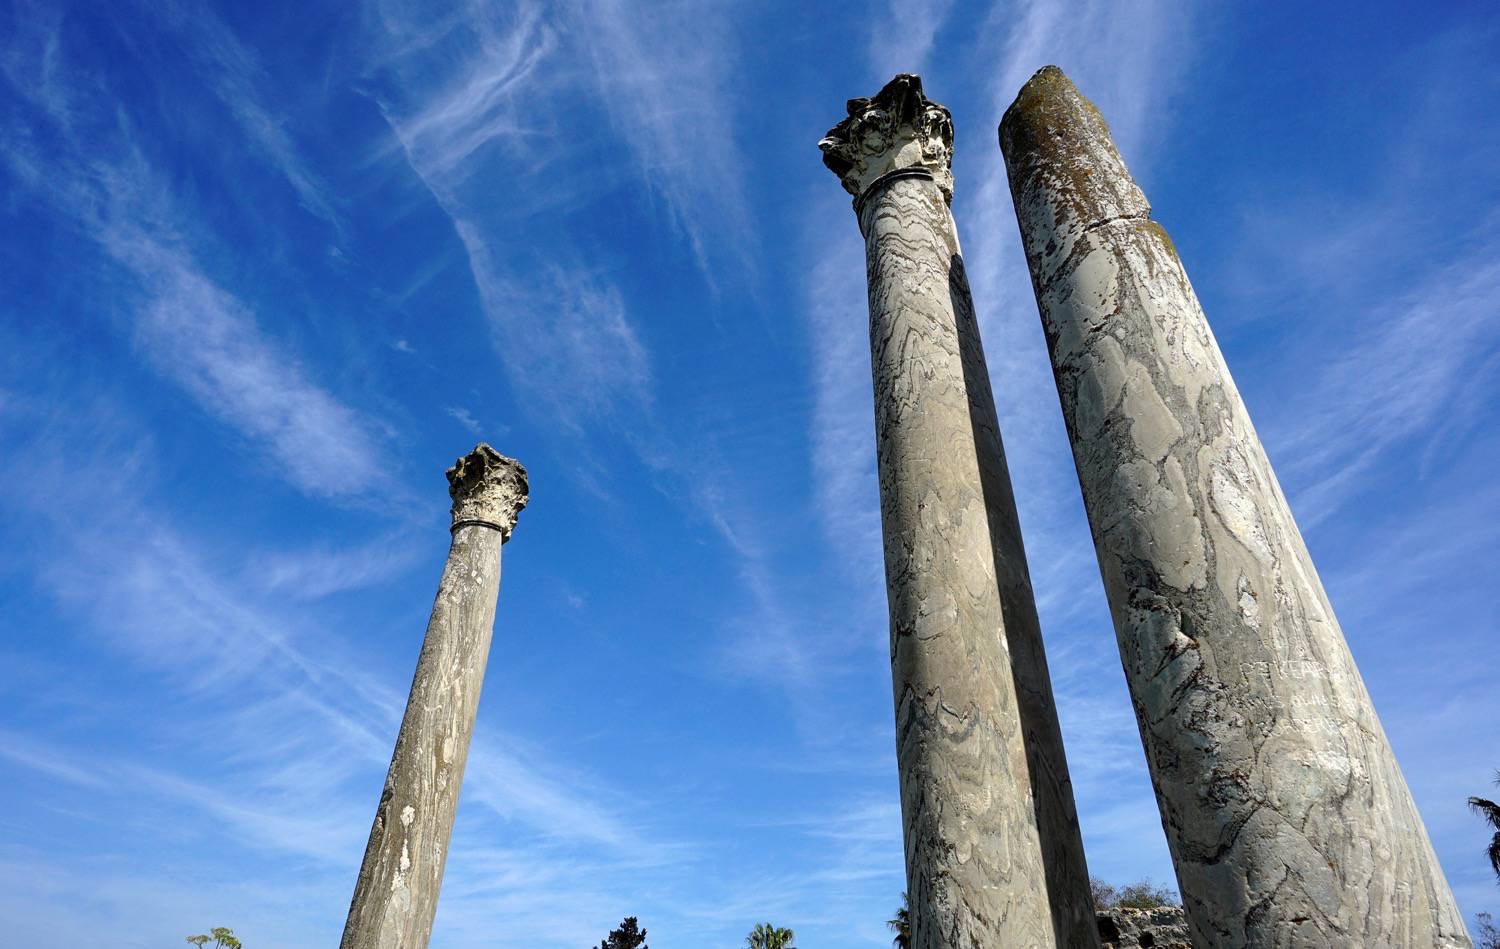 The columns of "cipolin" of the Esculape Temple